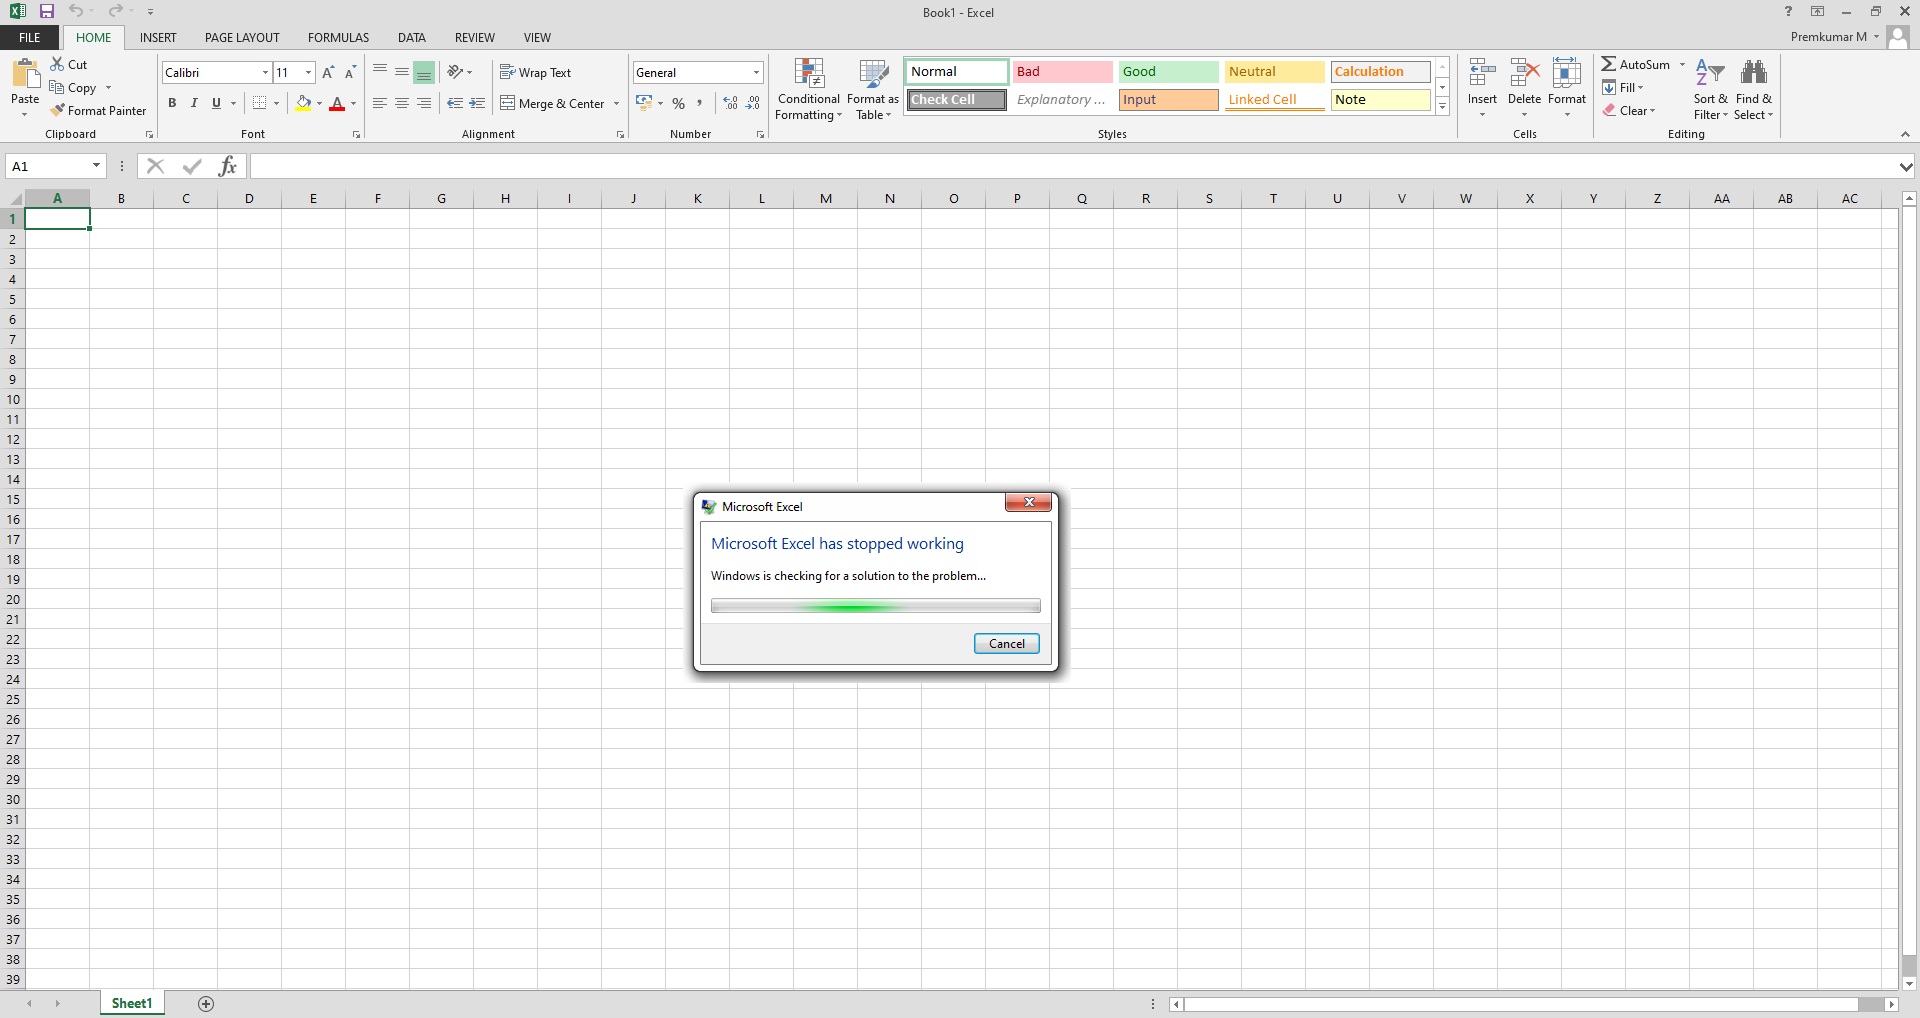 MS Excel has Stopped Working how to resolve?